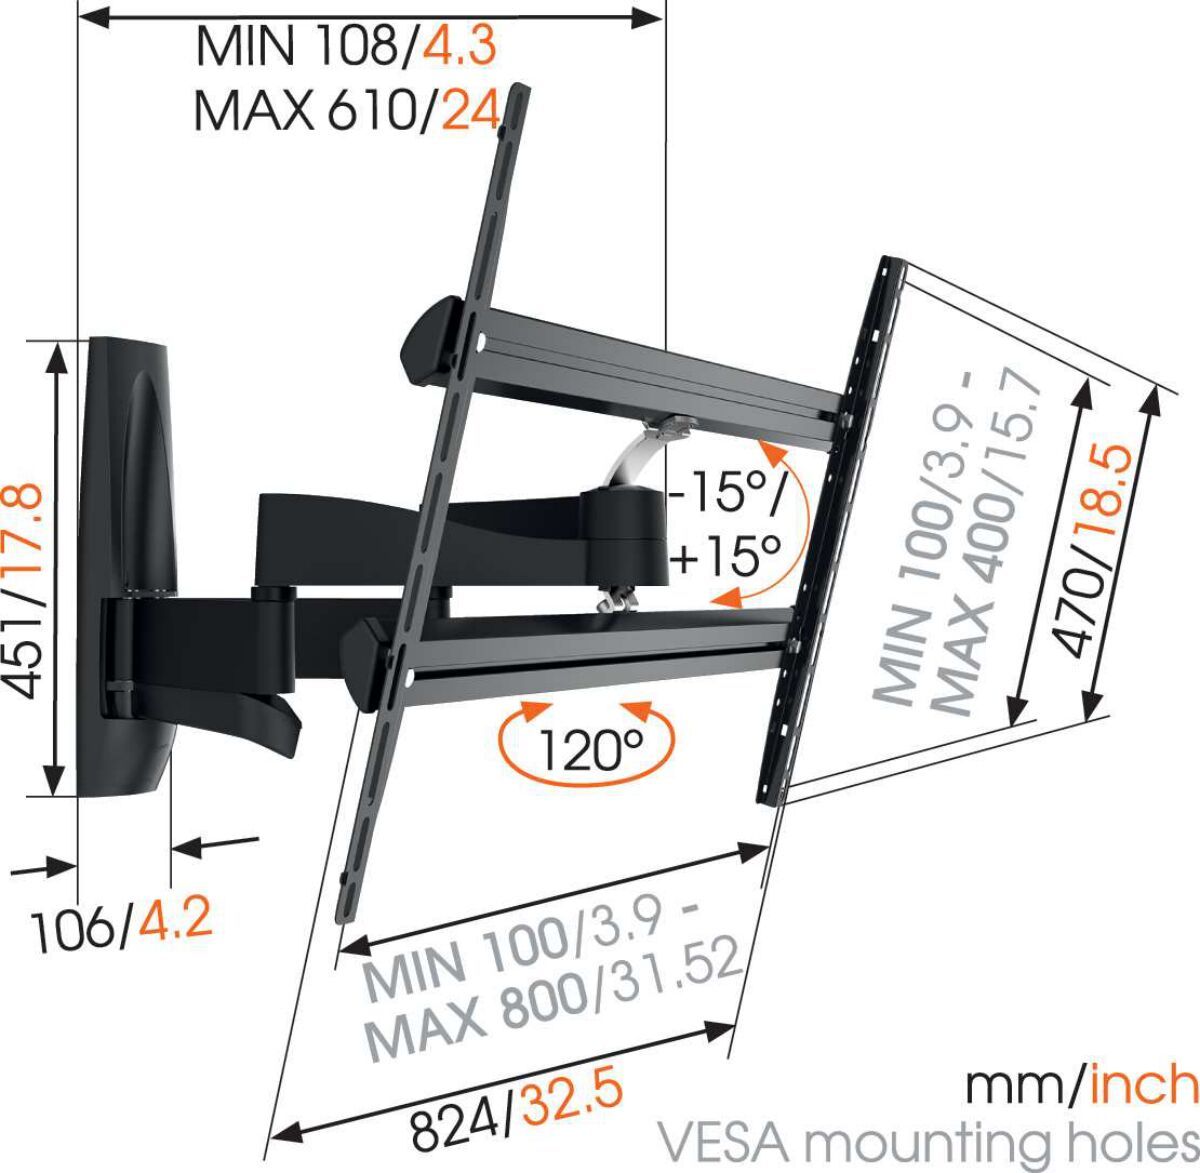 Vogel's WALL 3450 Full-Motion TV Wall Mount - Suitable for 55 up to 100 inch TVs - Forward and turning motion (up to 120°) - Tilt up to 15° - Dimensions